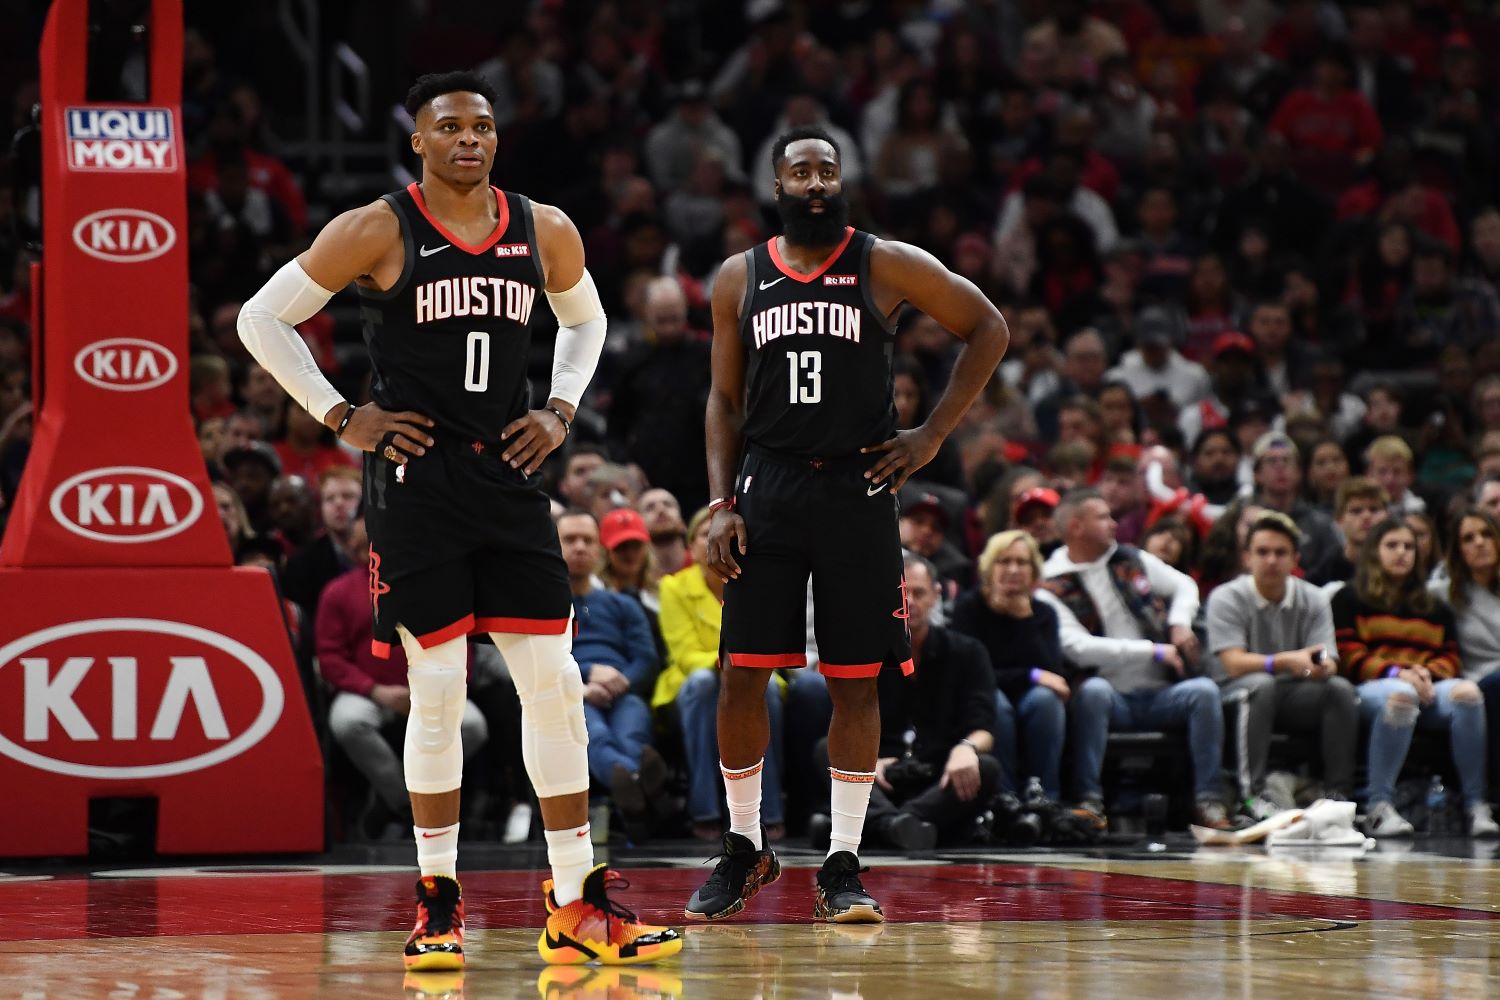 Houston Rockets To Exercise Caution with Russell Westbrook - Last